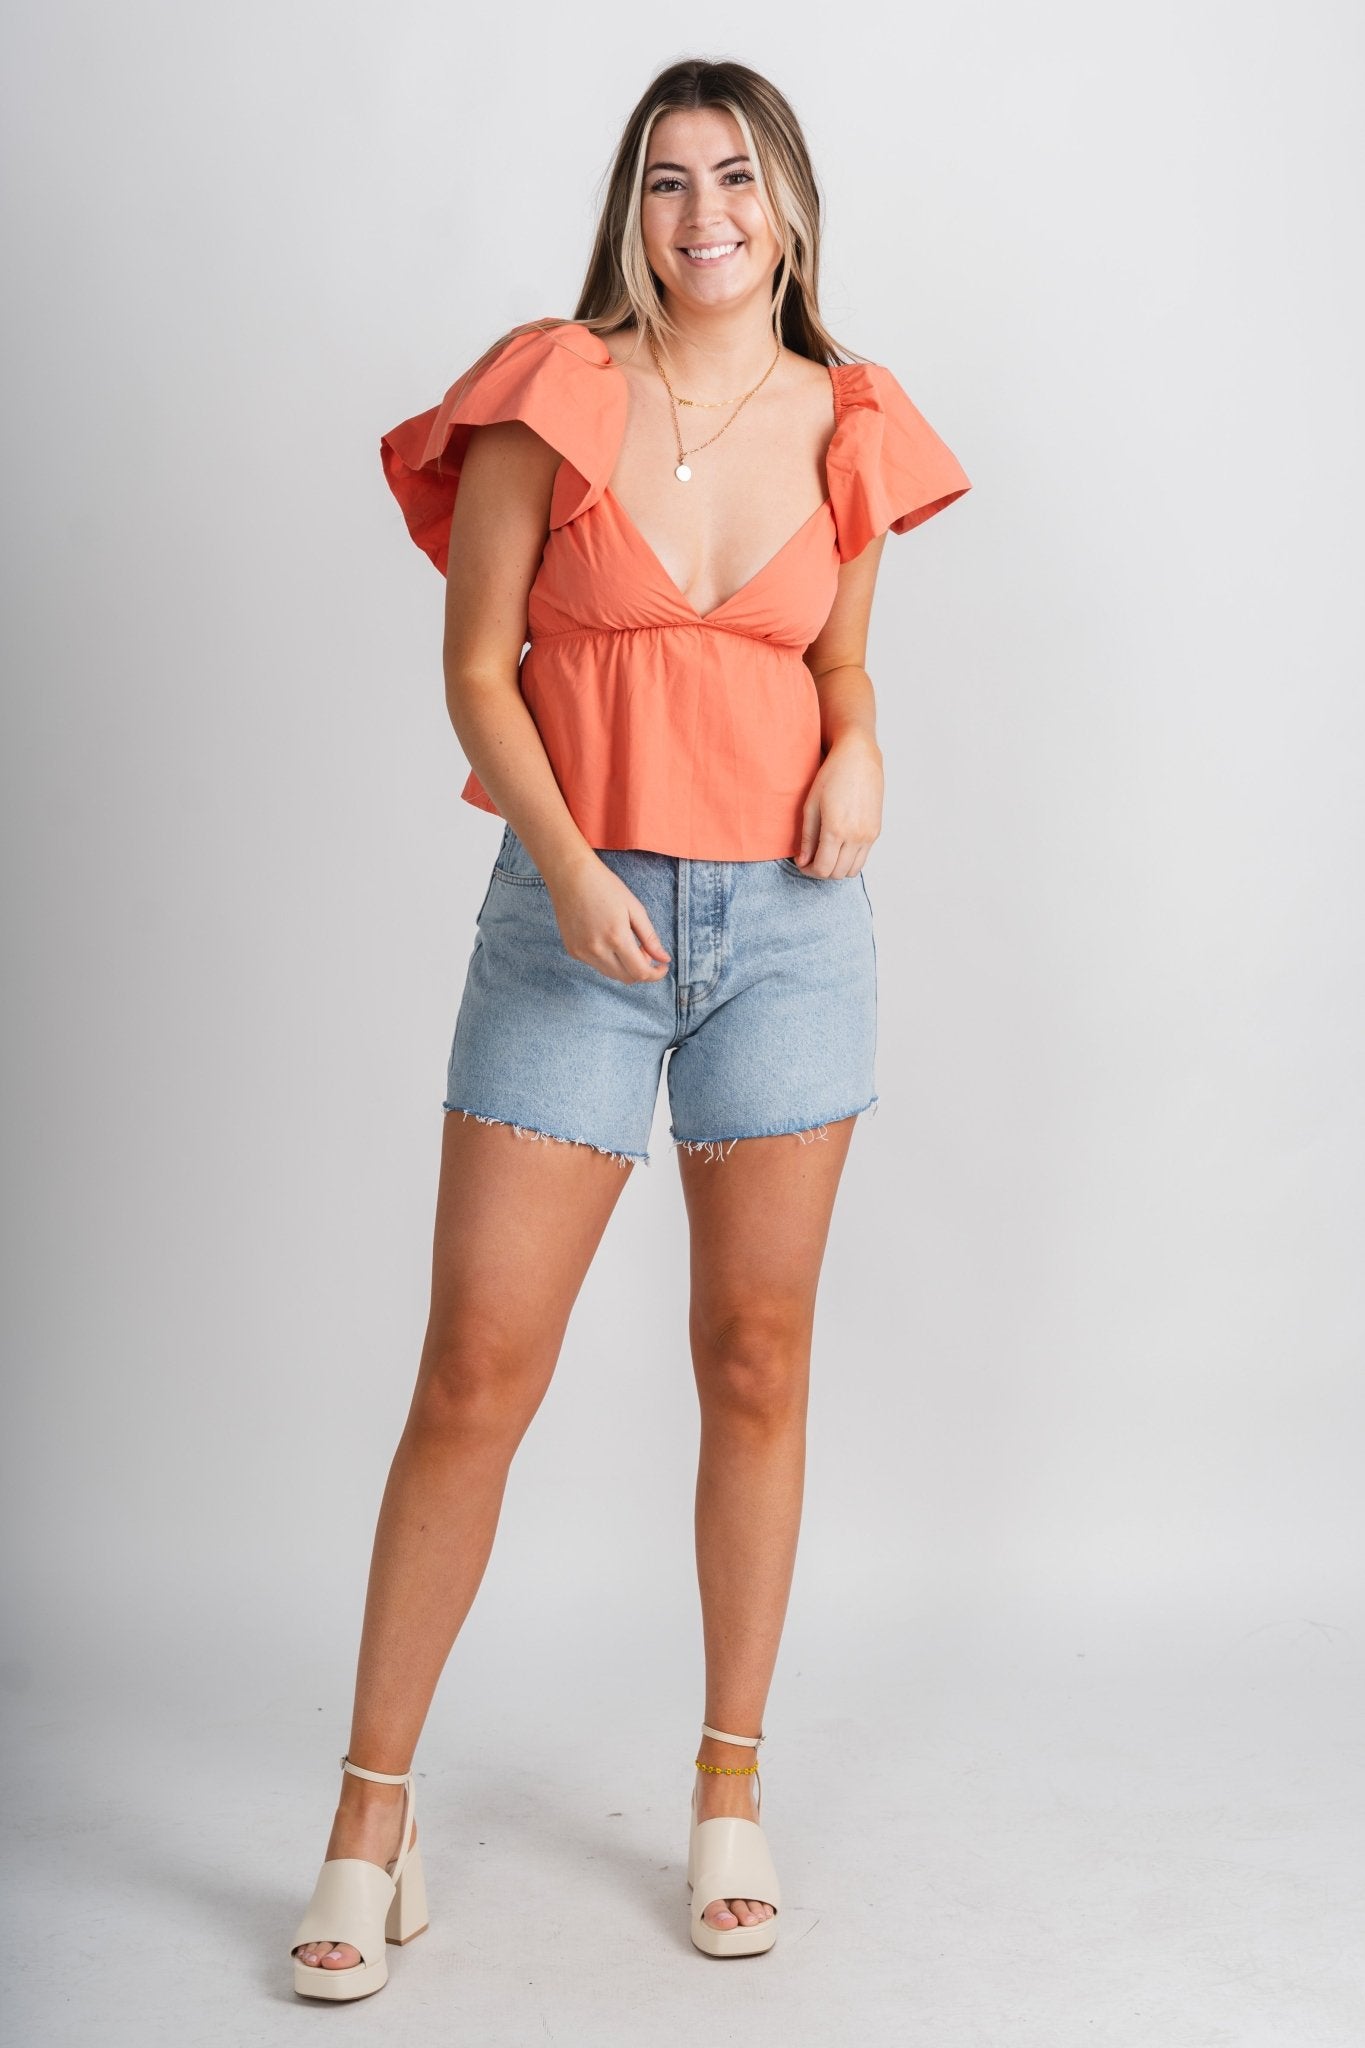 Ruffle sleeve peplum top coral - Stylish Top - Trendy Staycation Outfits at Lush Fashion Lounge Boutique in Oklahoma City